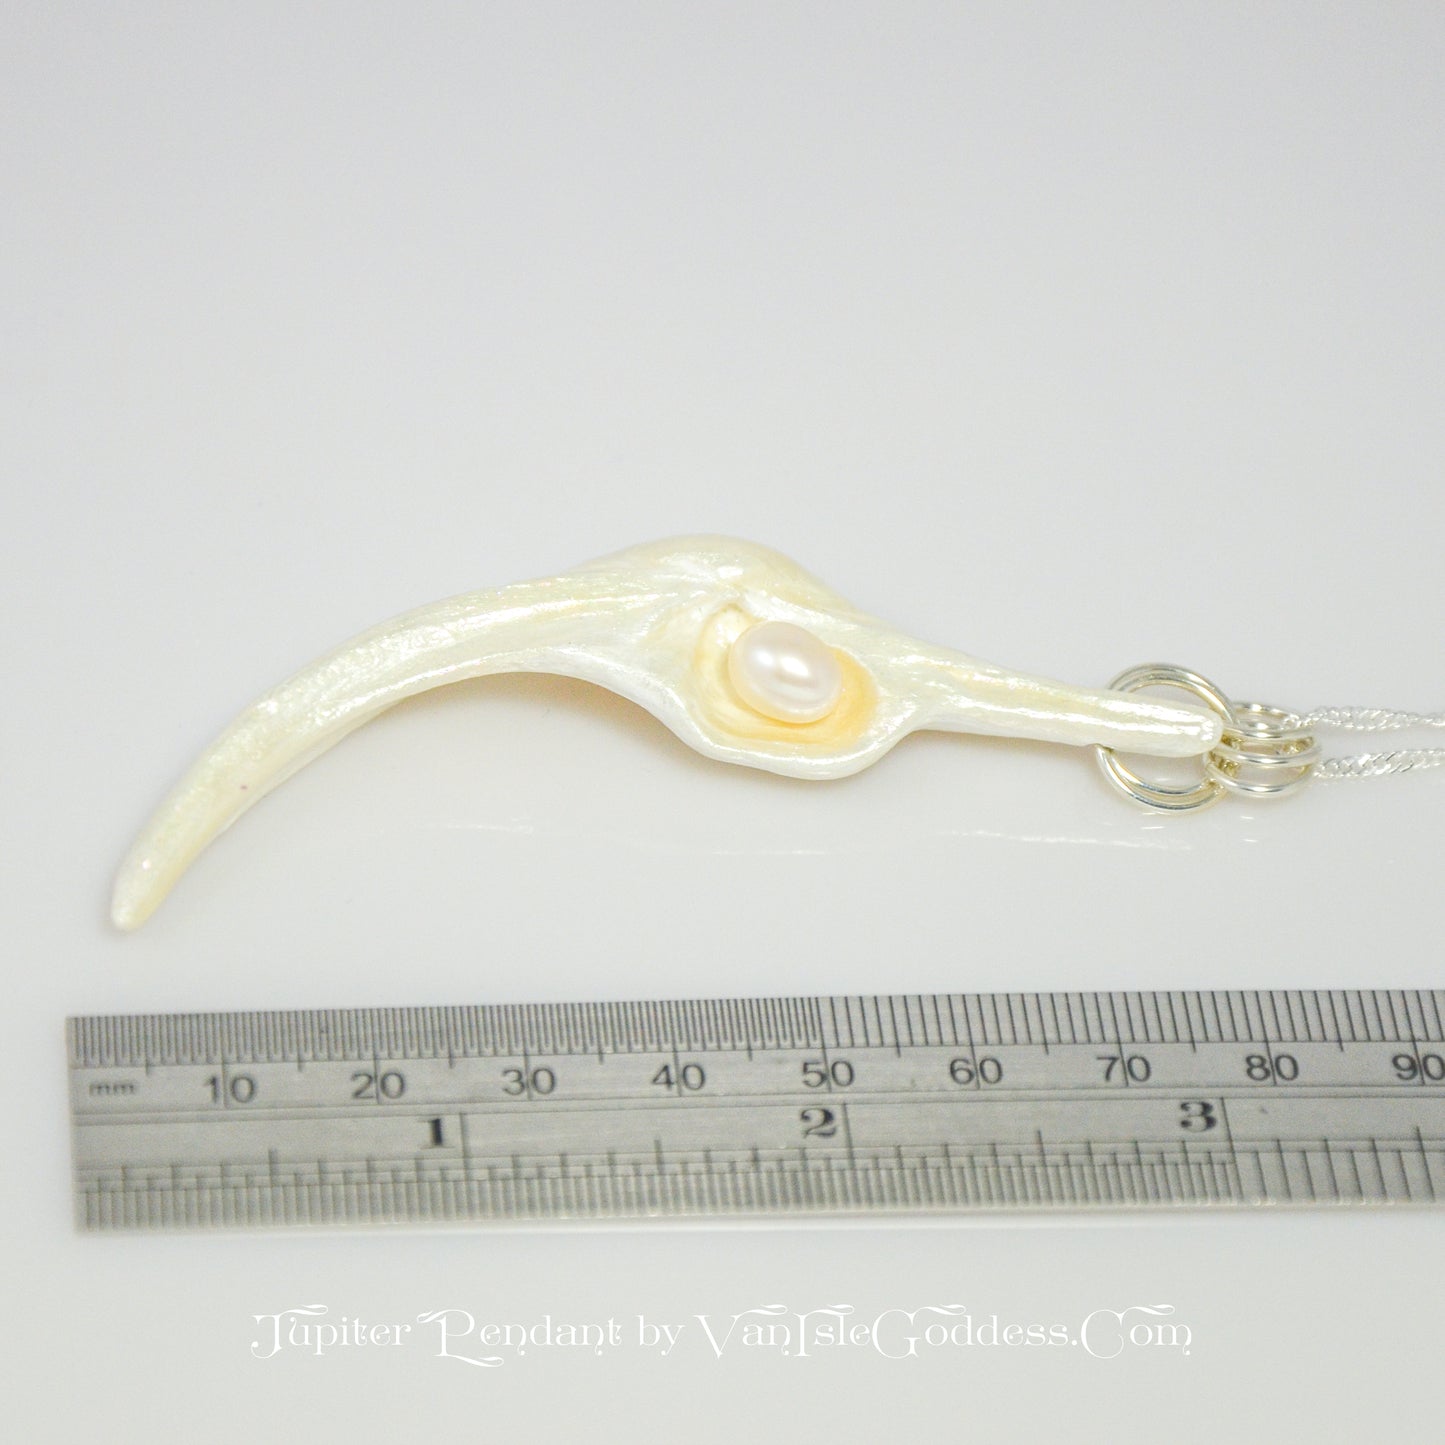 Jupiter is a natural seashell pendant with a real freshwater pearl. The pendant is shown laying on its side so the viewer can see the length. of the pendant.